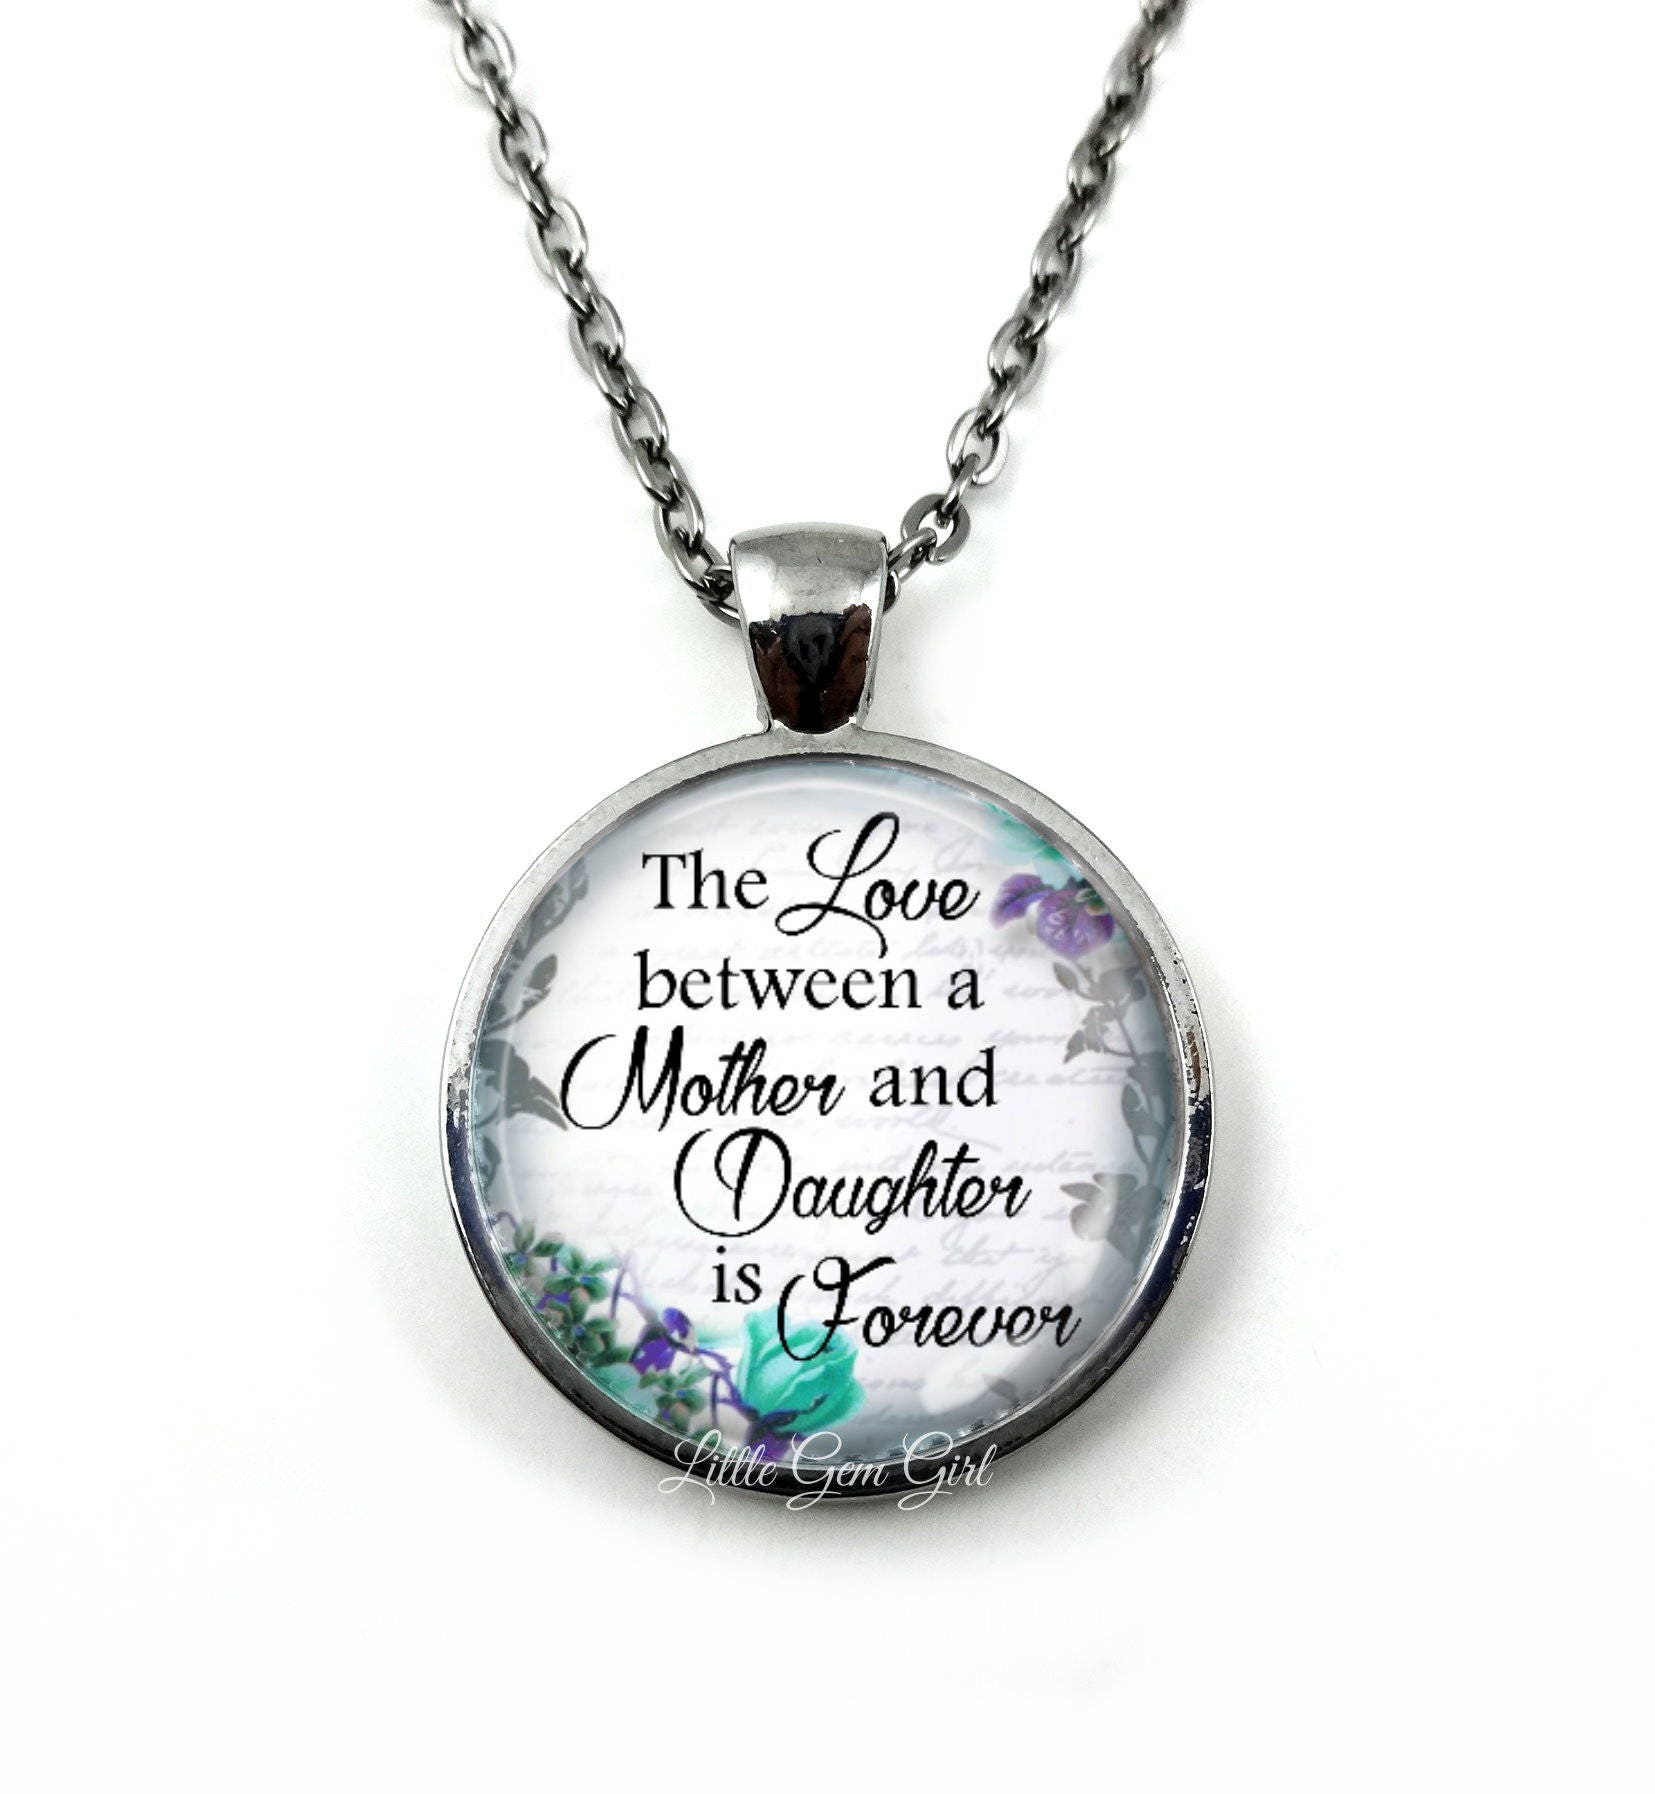 Love Between A Mother and Daughter is Forever Necklace Pendant